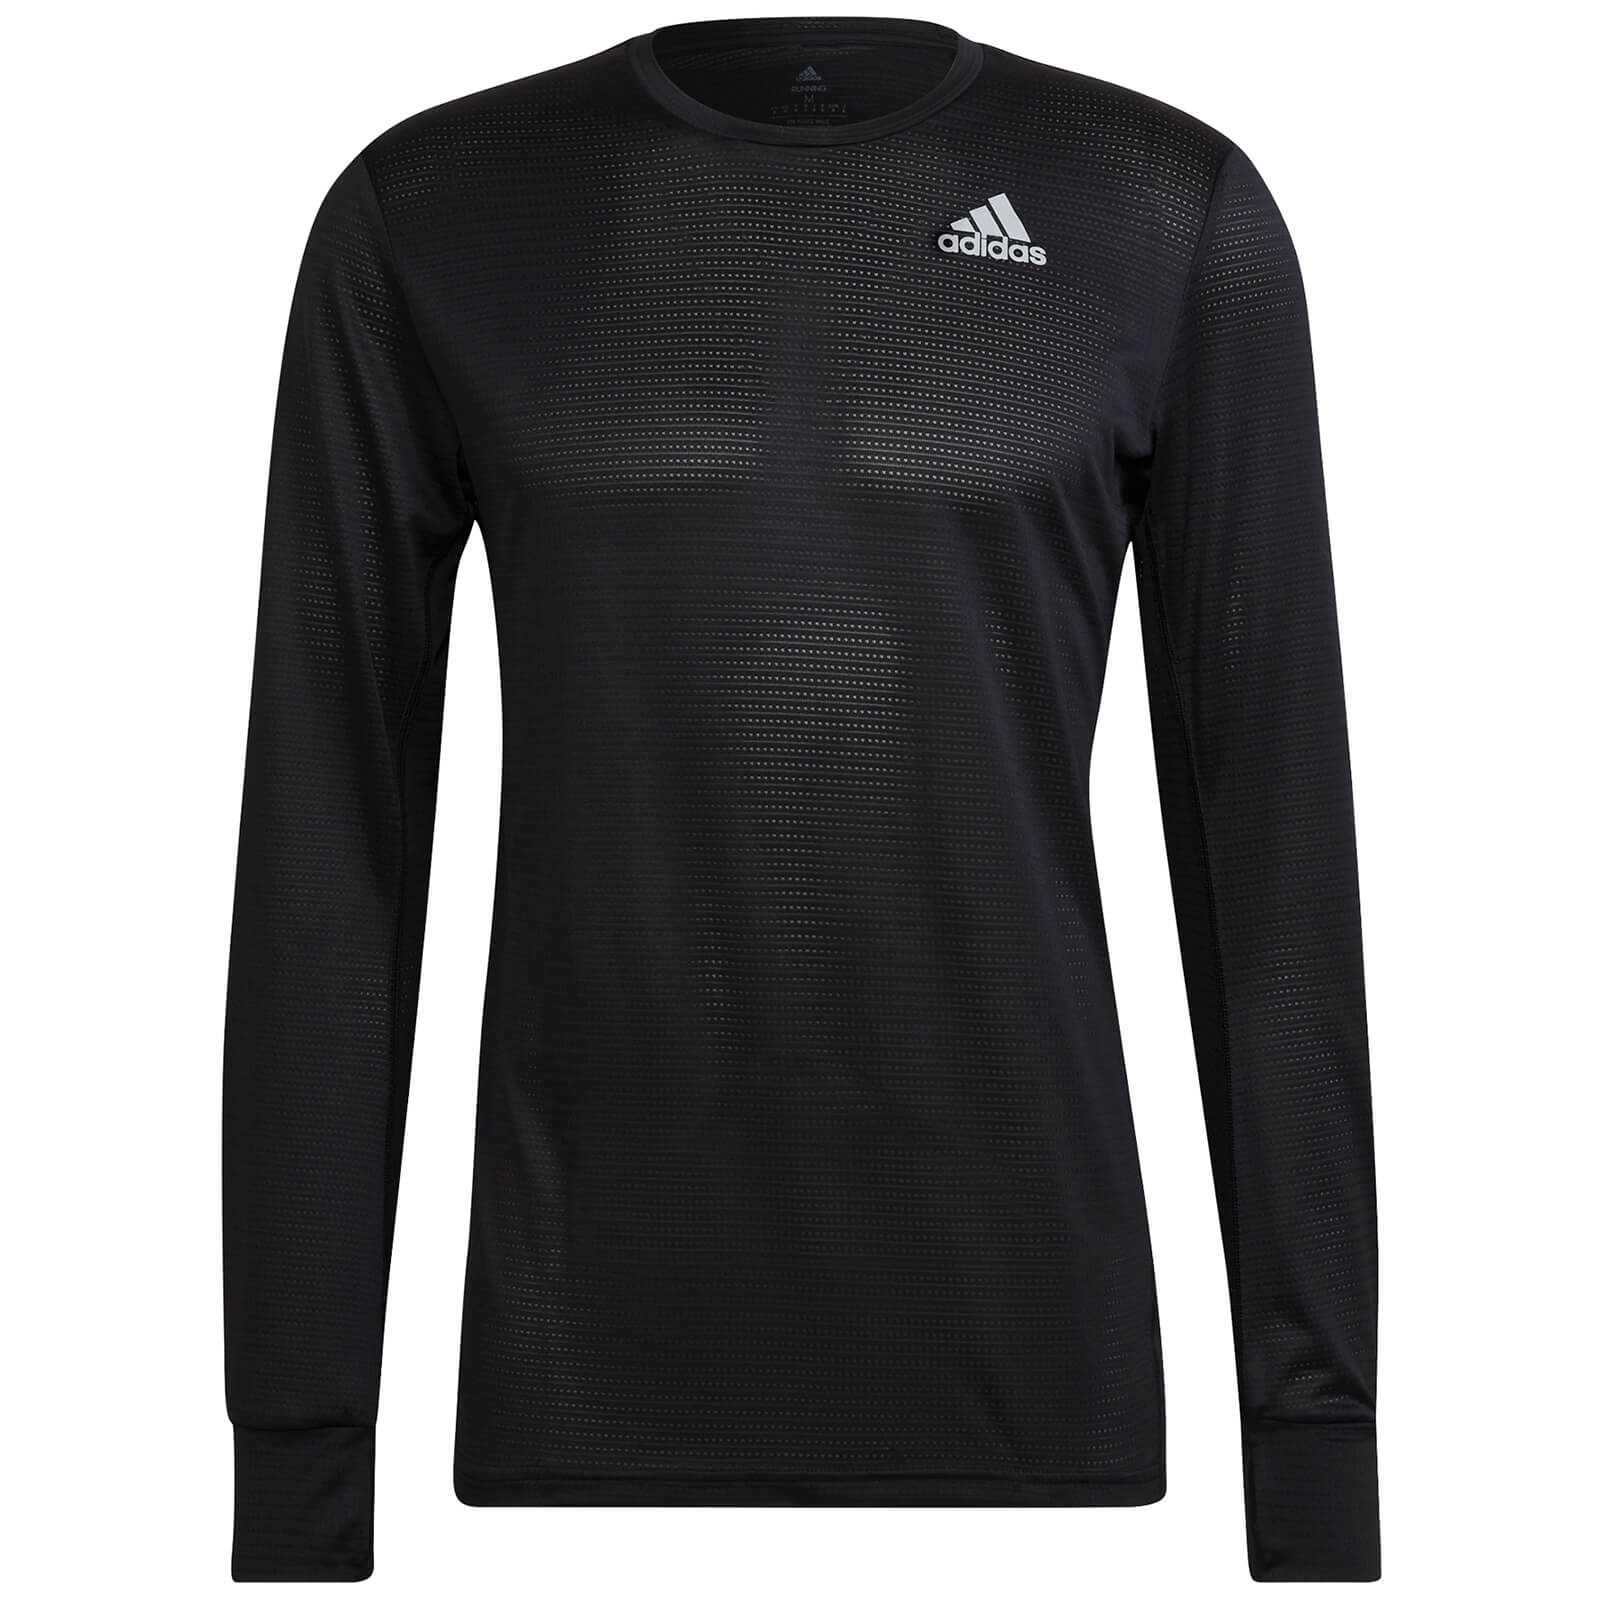 Image of adidas Own The Run Long Sleeve T-Shirt - Black/Reflective Silver - L